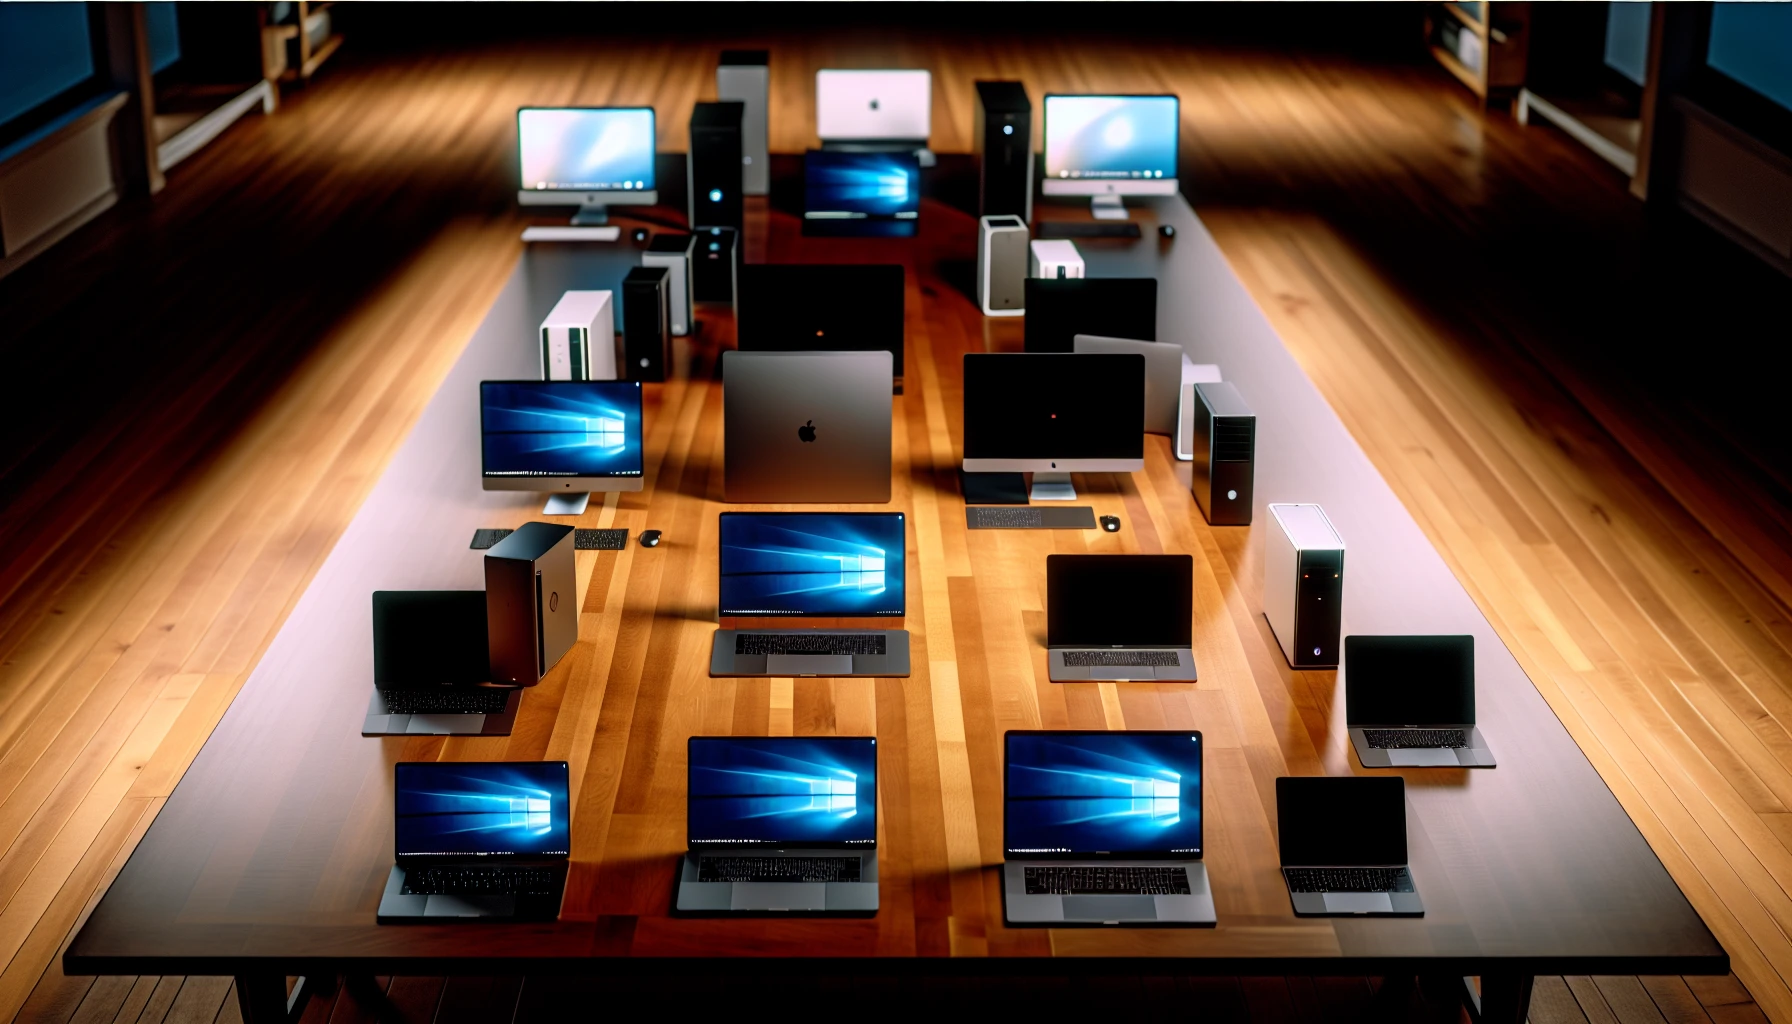 A collection of various types of personal computers, including desktops and laptops, representing the meaning of PC for individual use.